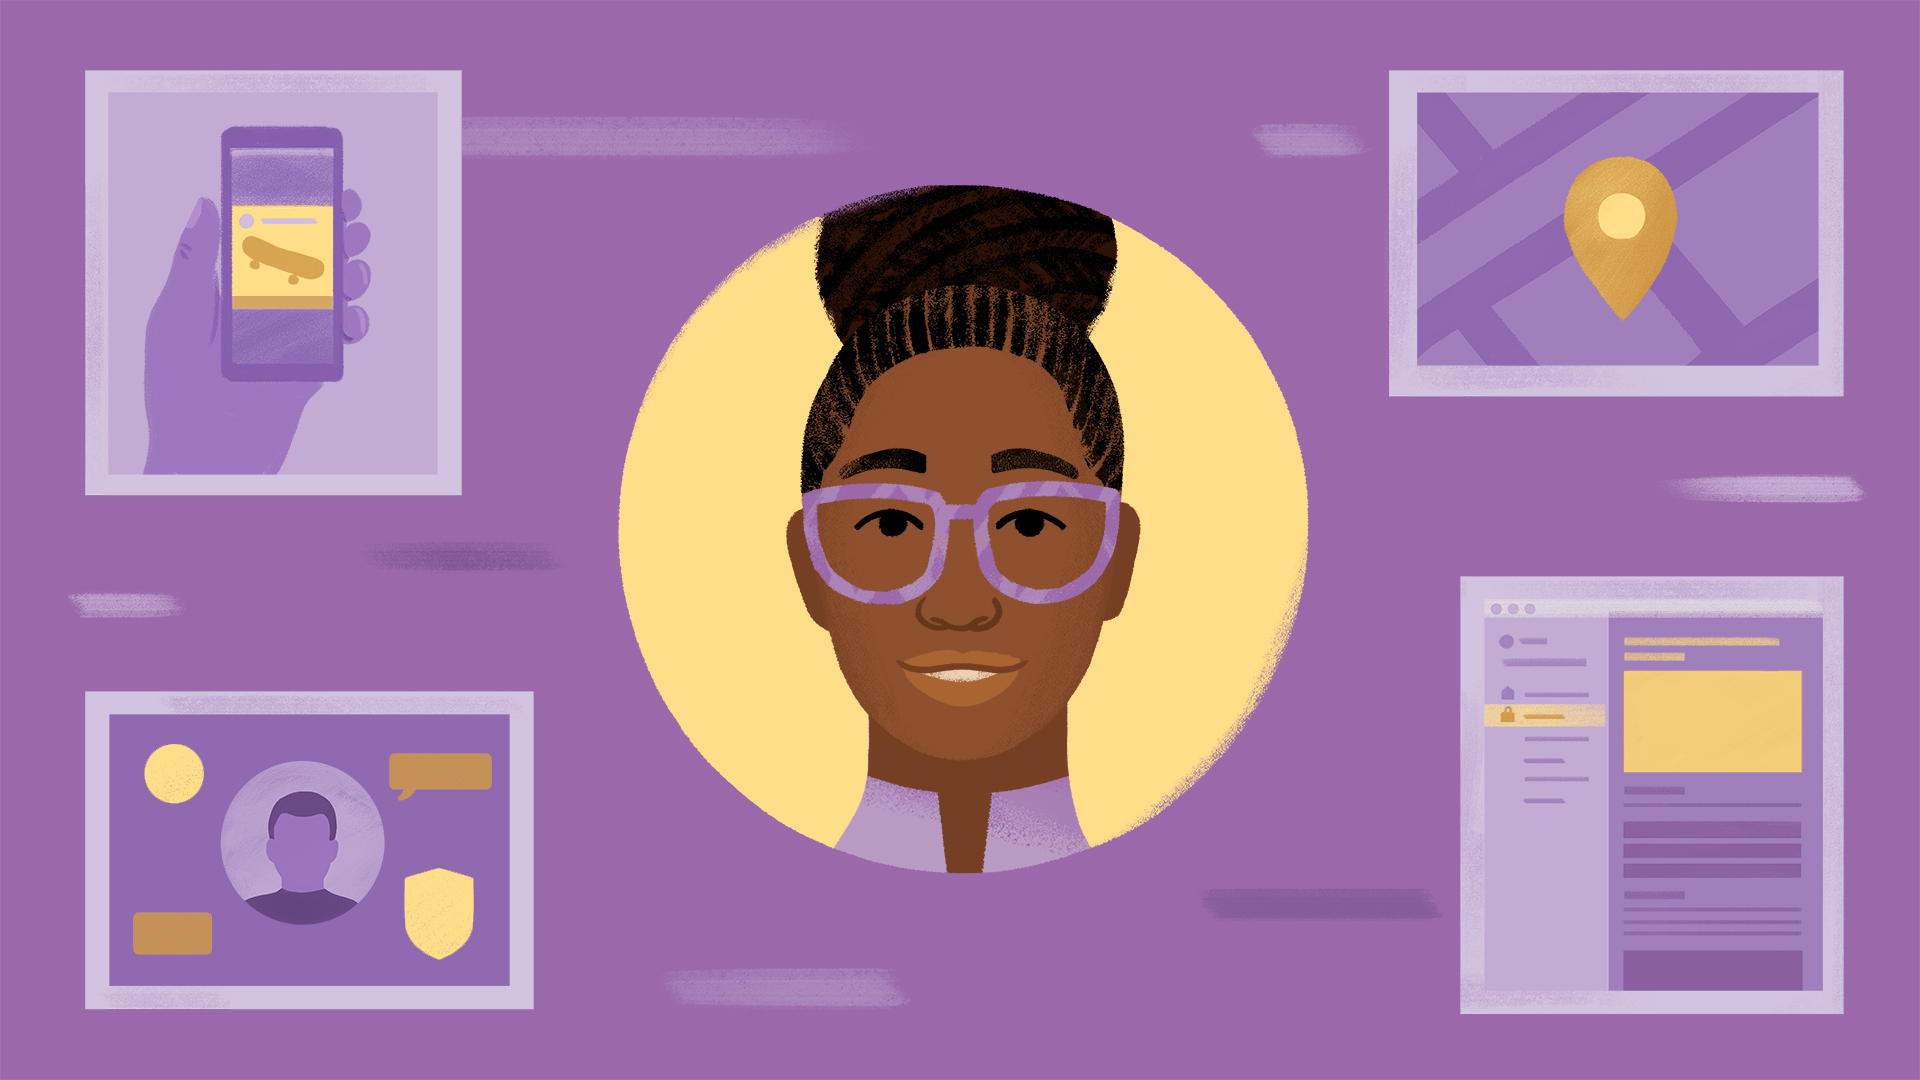 Illustration depicting a woman and her privacy settings on Meta technologies